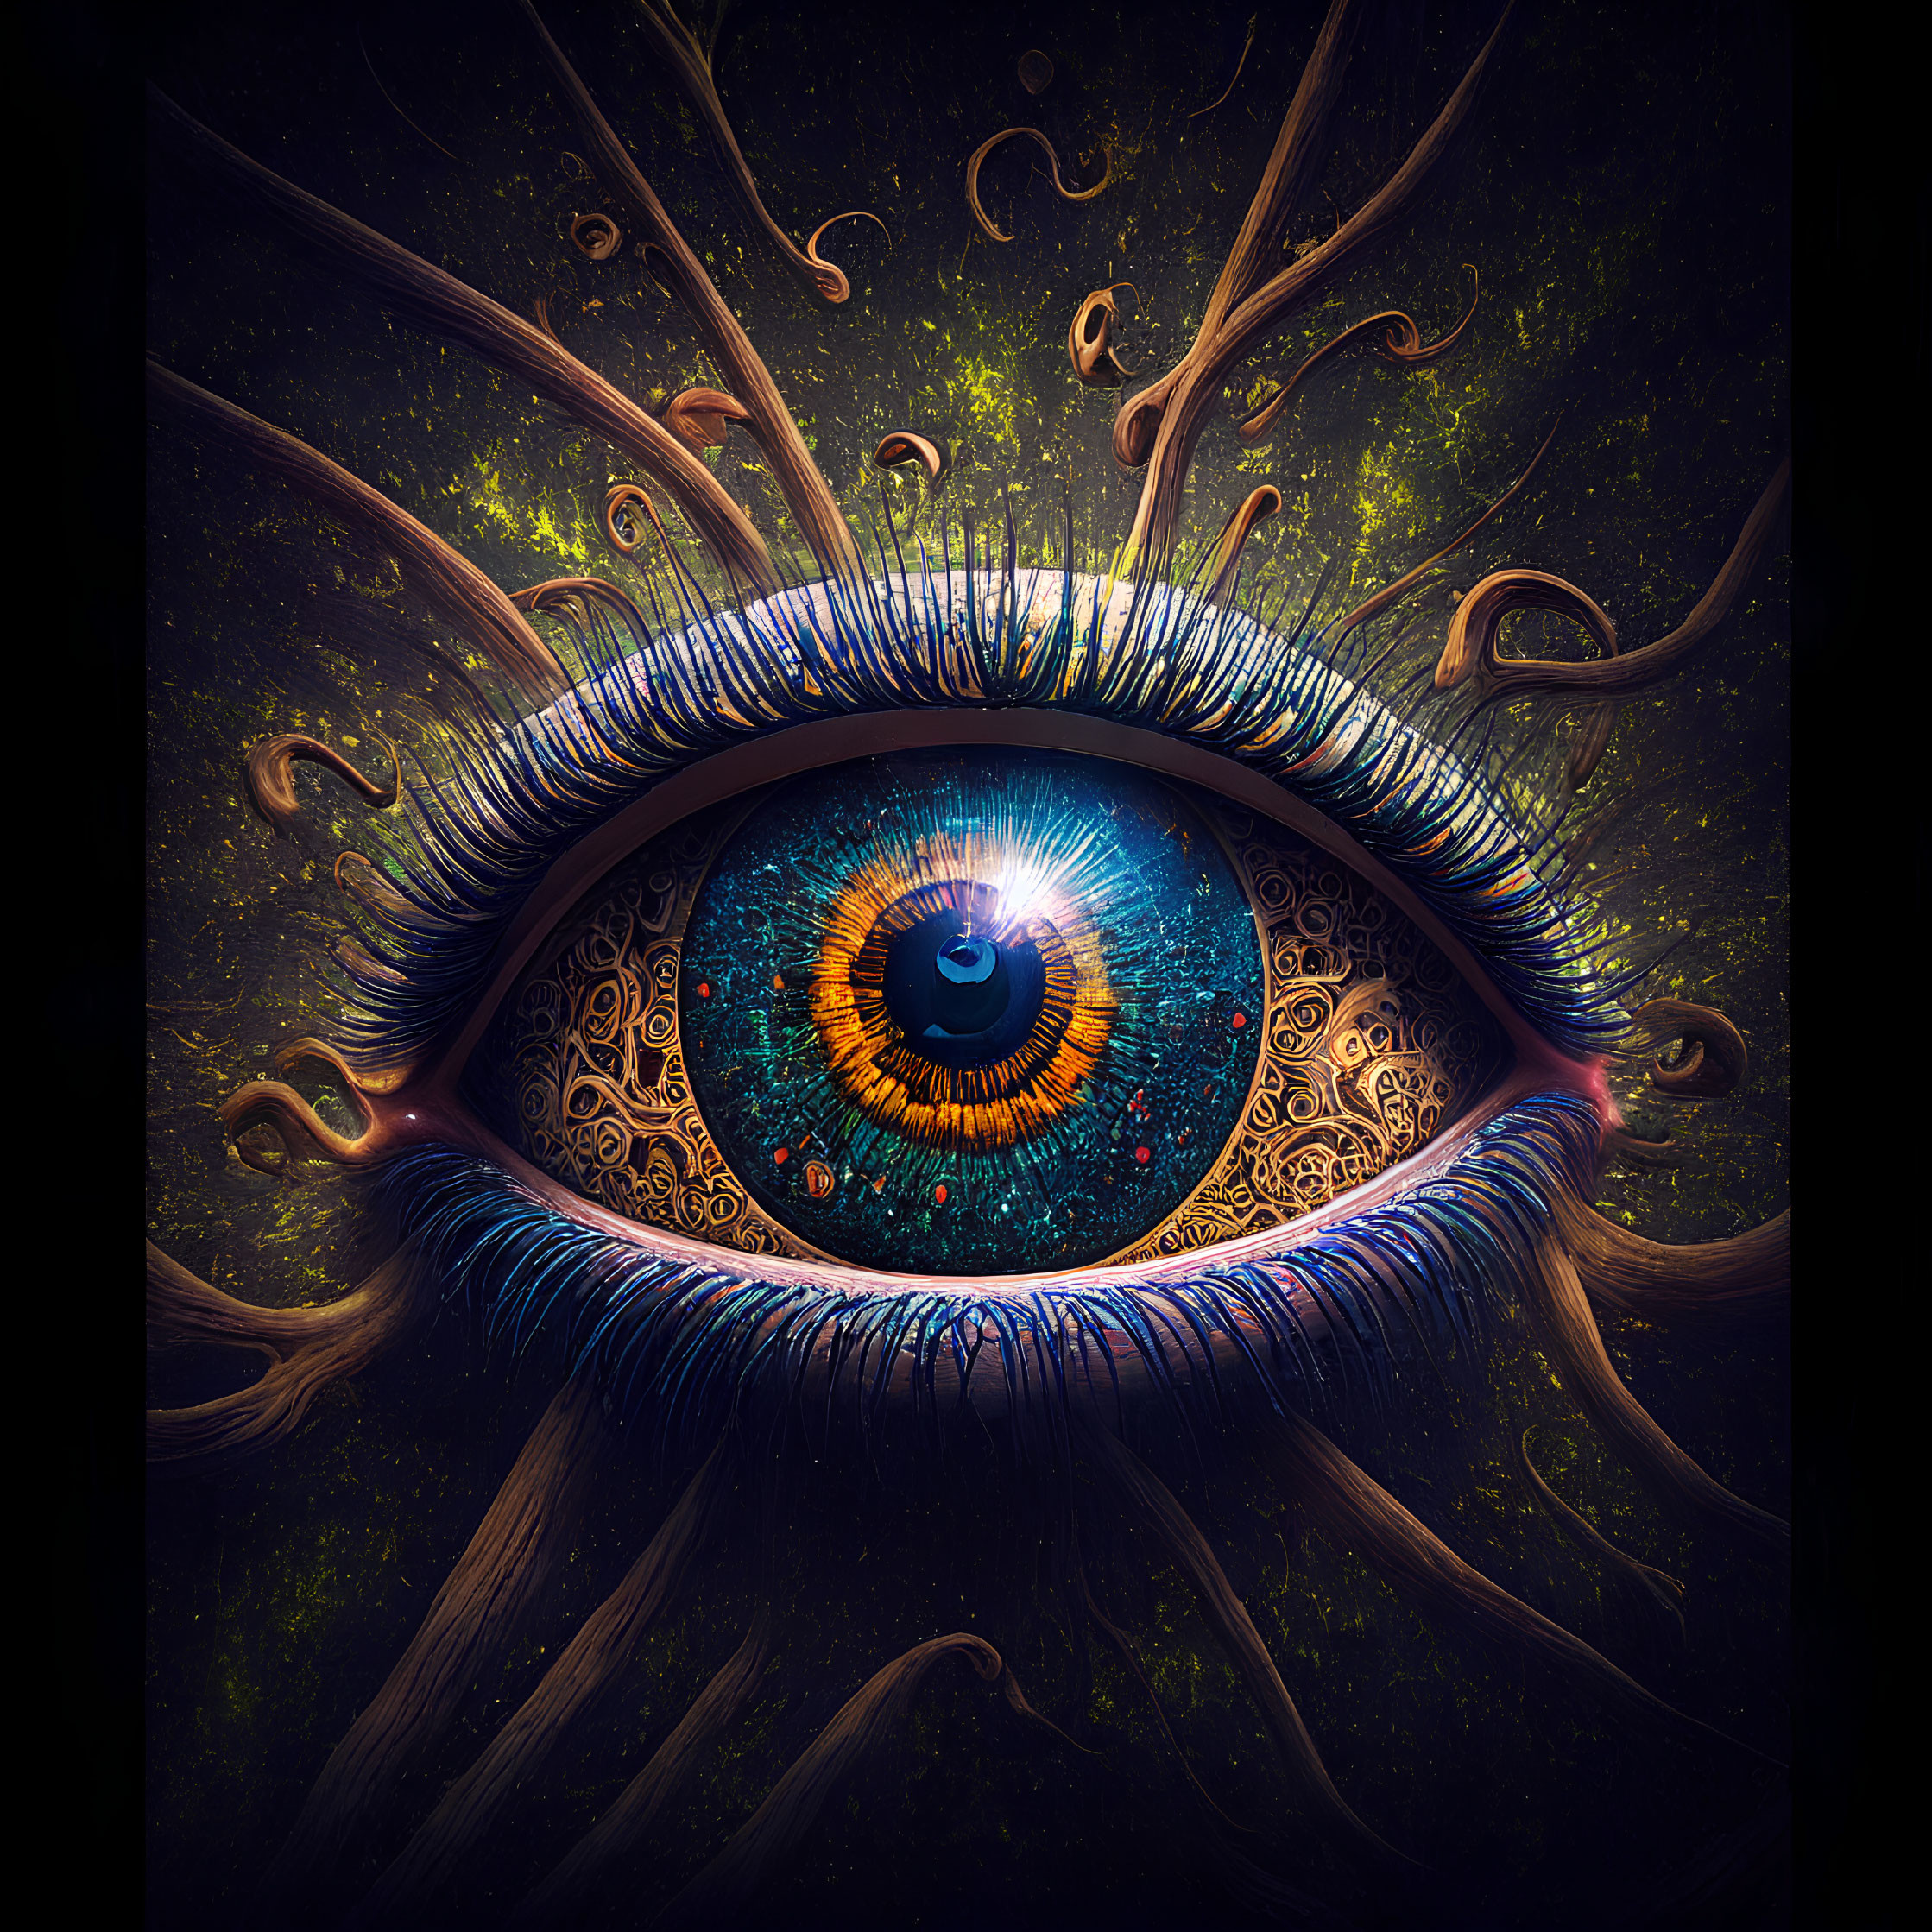 Colorful surreal eye with intricate iris and swirling tentacle-like shapes